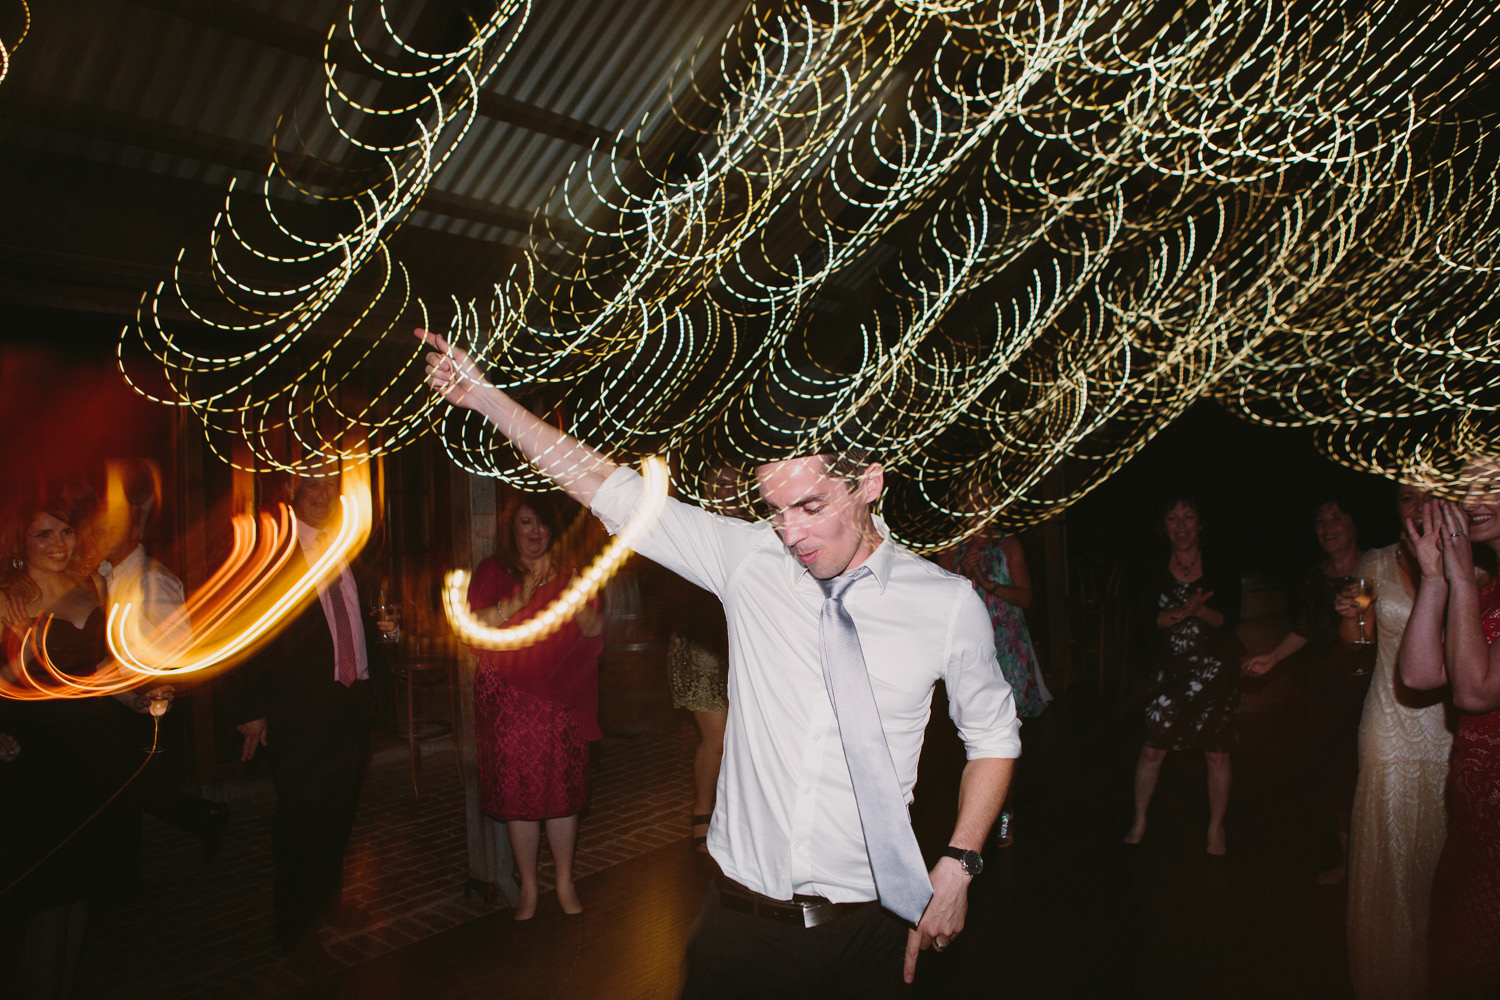 Brides brother dancing the night away to celebrate